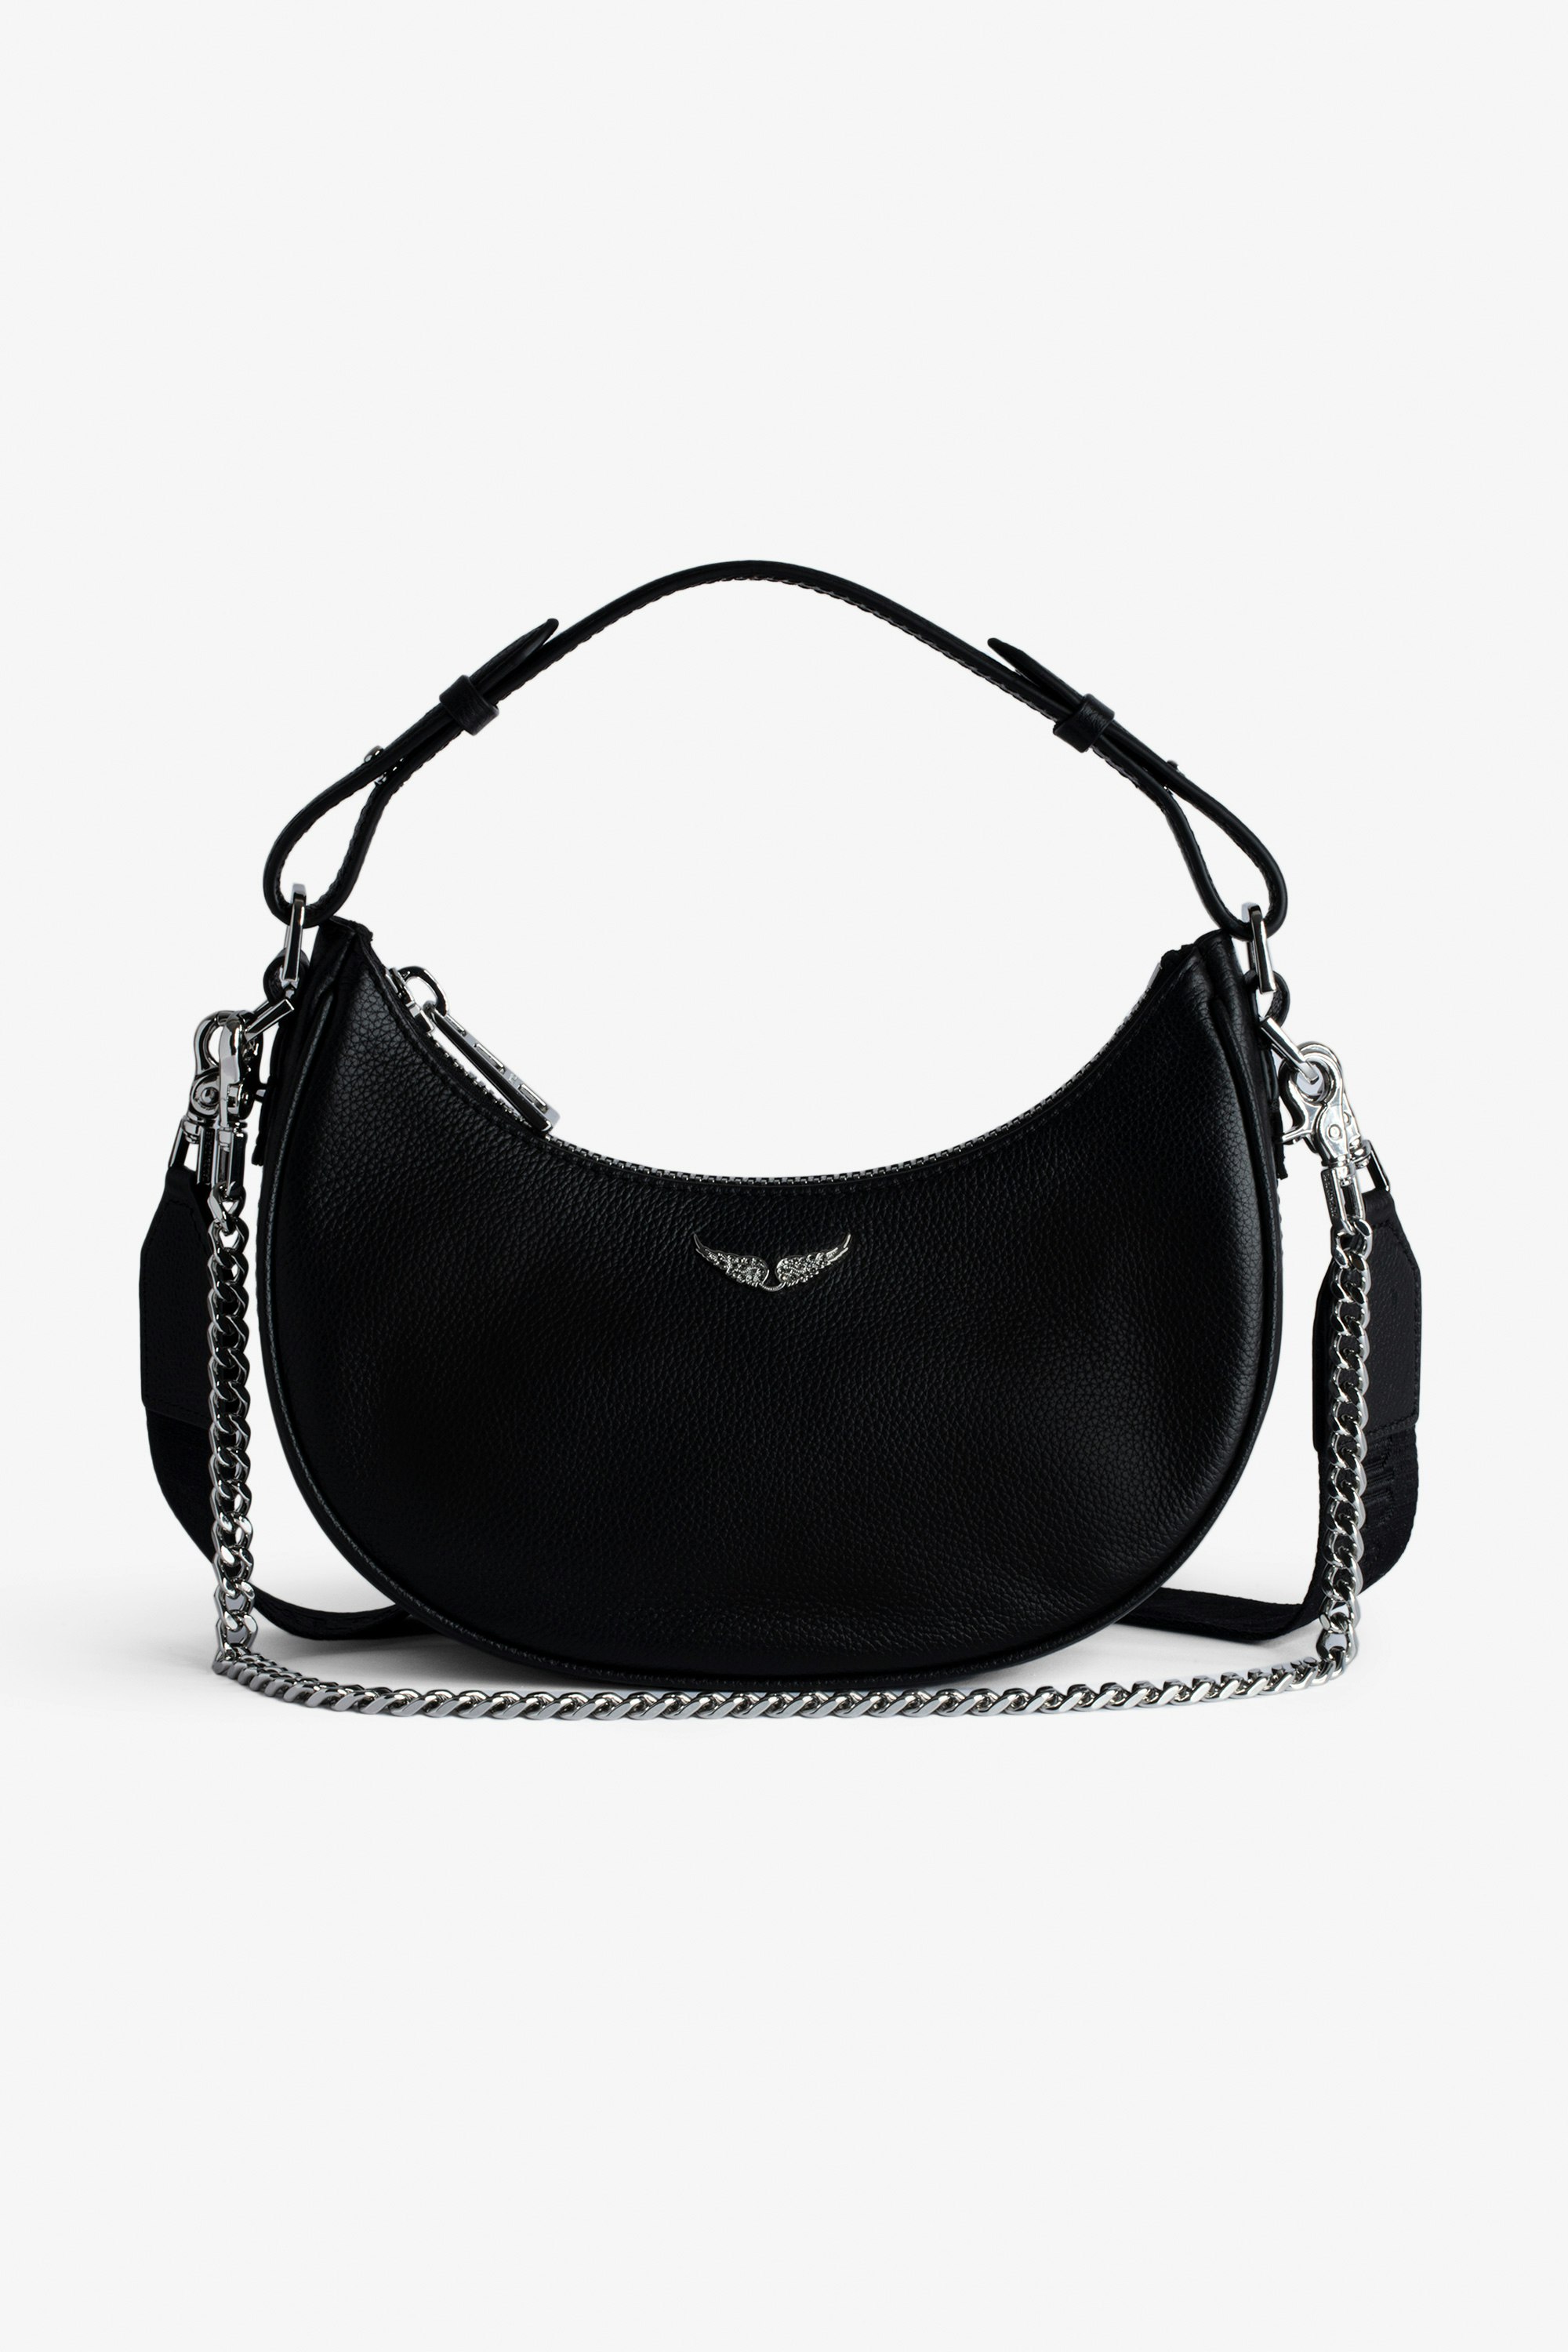 Moonrock bag Women’s half-moon bag in black grained leather with a short handle, shoulder strap, chain and signature wings.